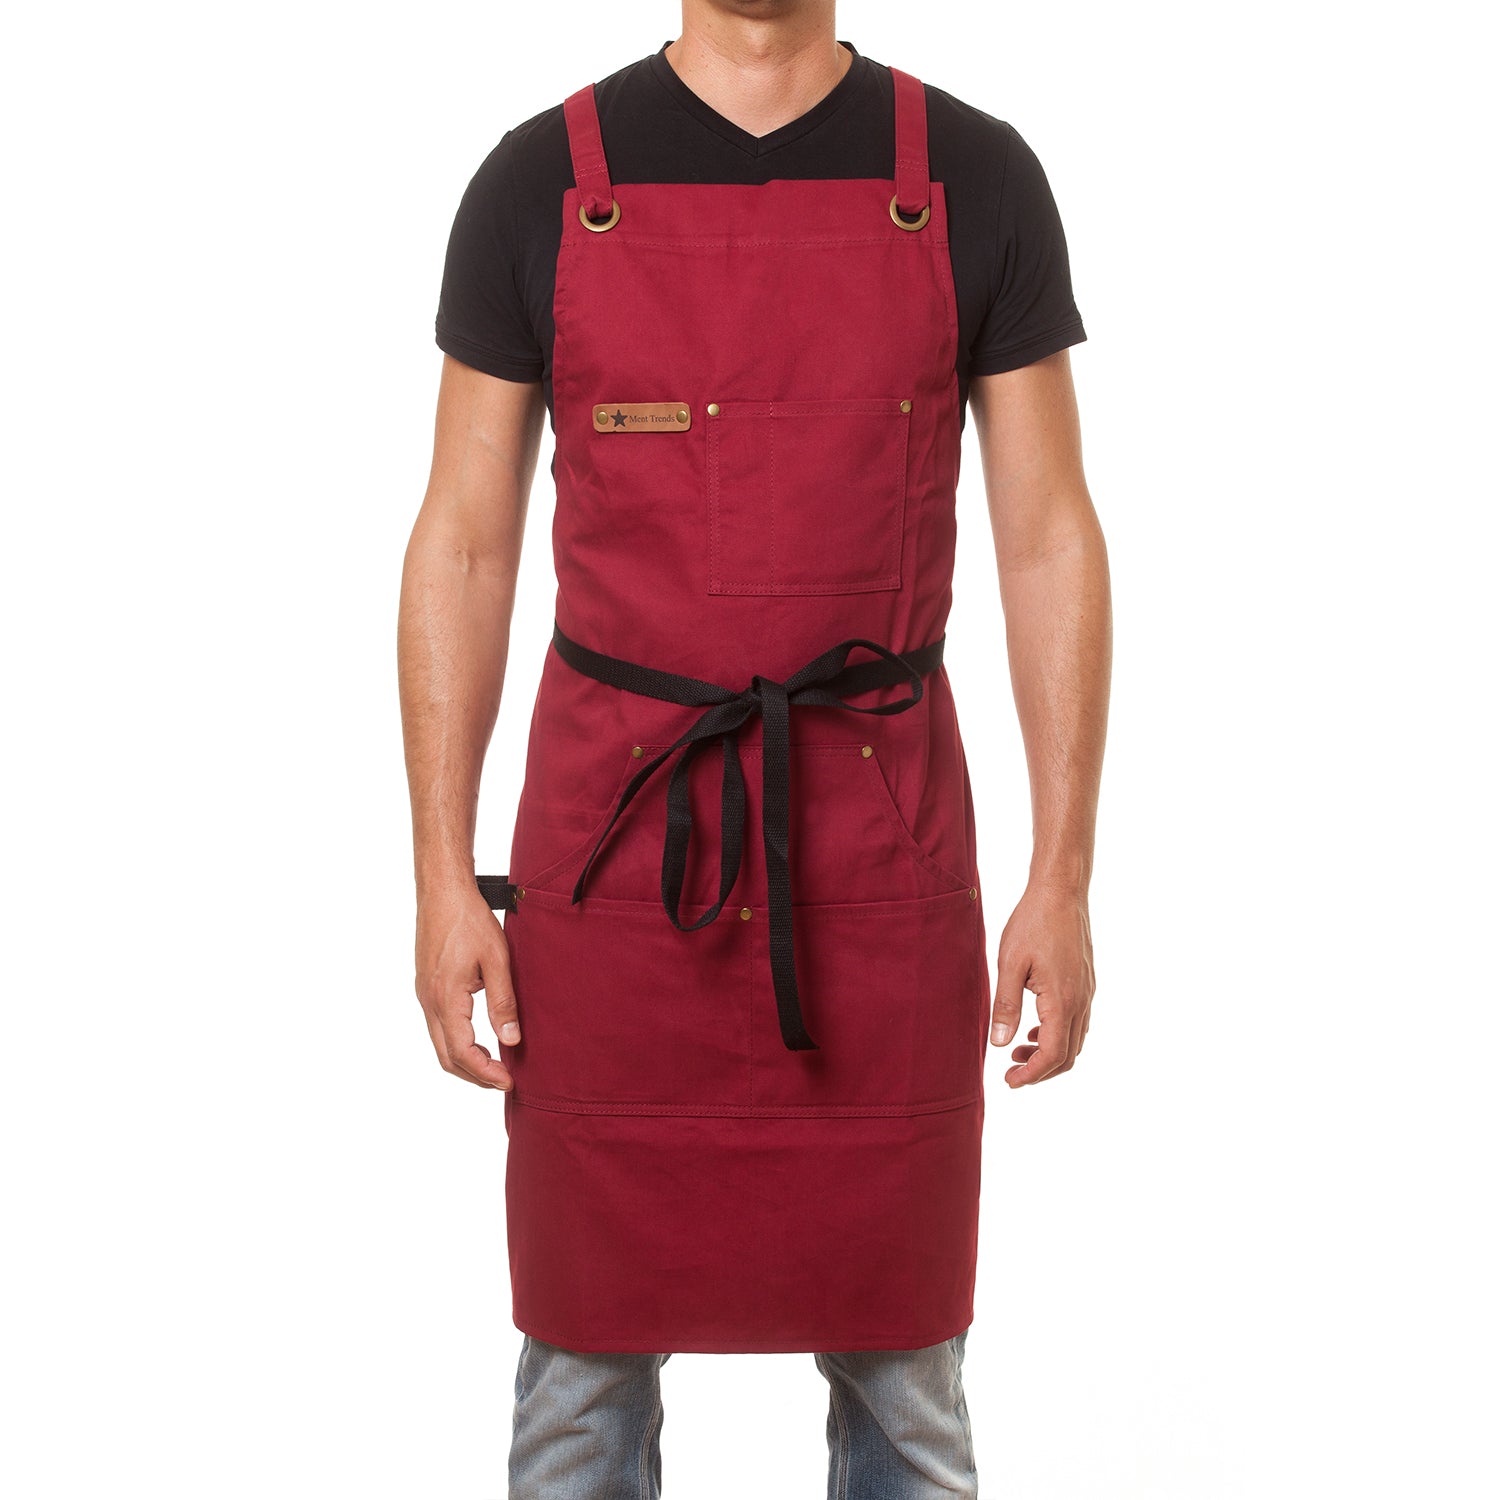 Chef's Cooking Apron - Wine Red